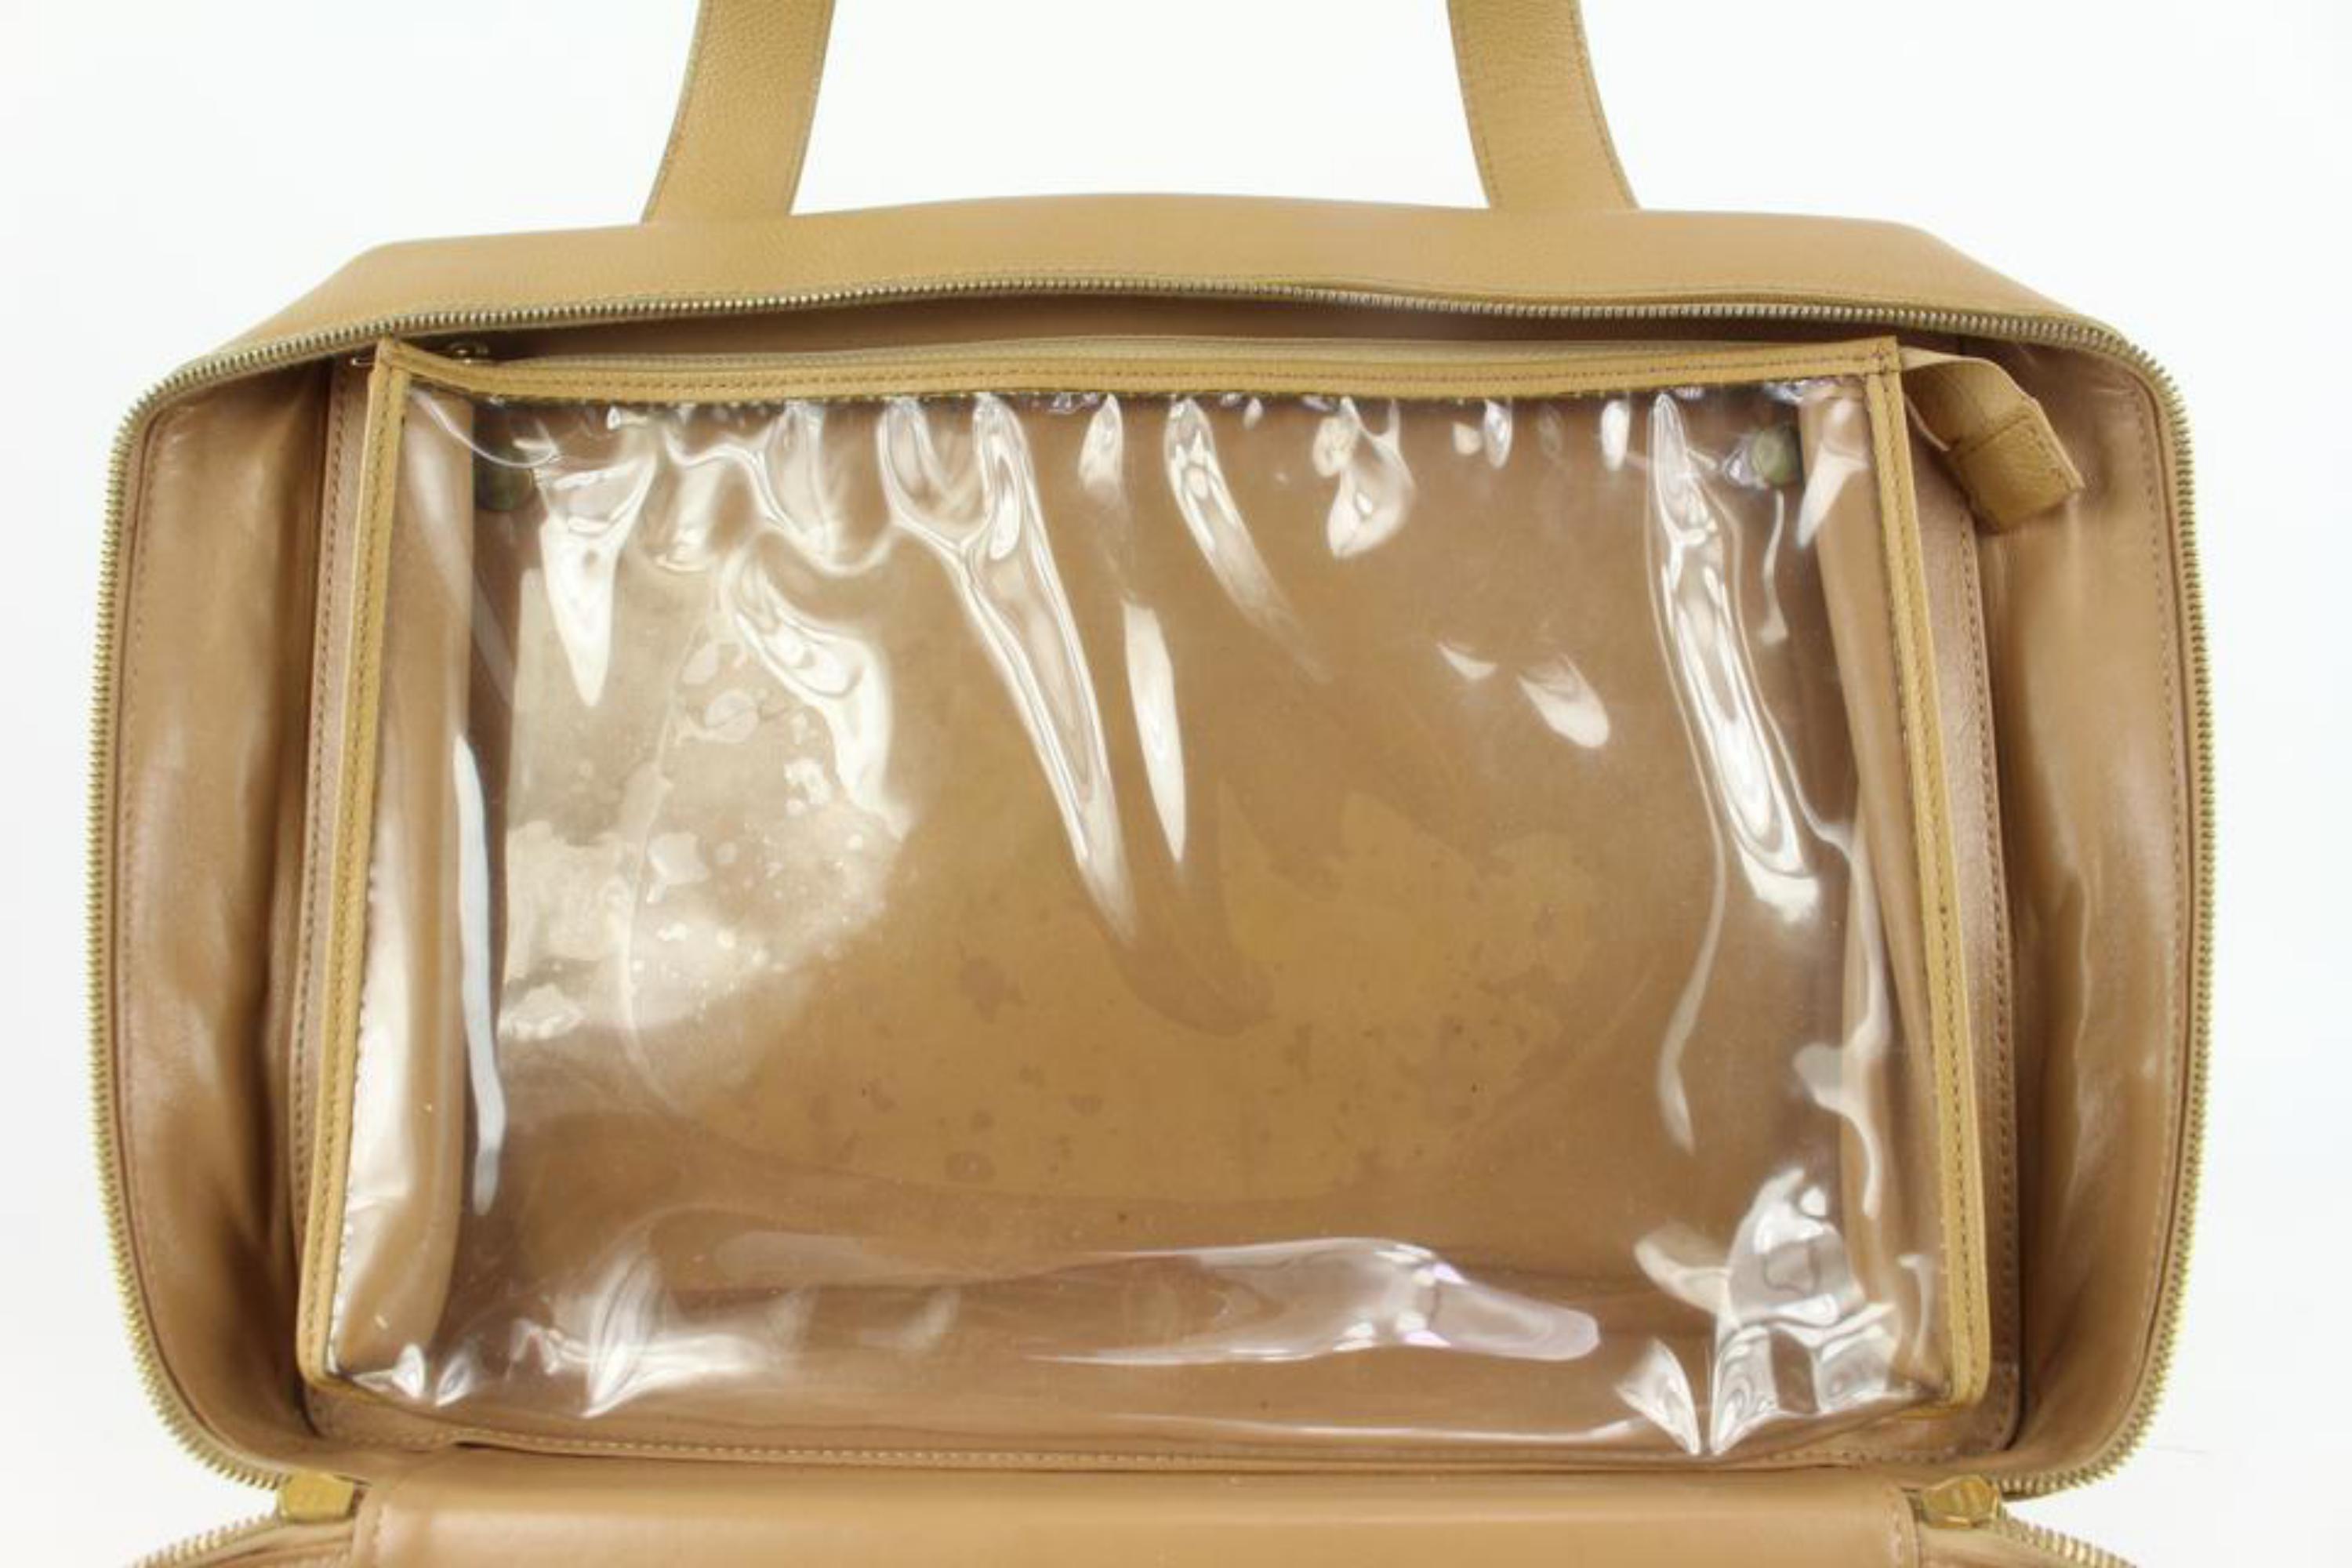 Chanel Beige Caviar Vanity Tote Bag GHW 115c11 In Good Condition For Sale In Dix hills, NY